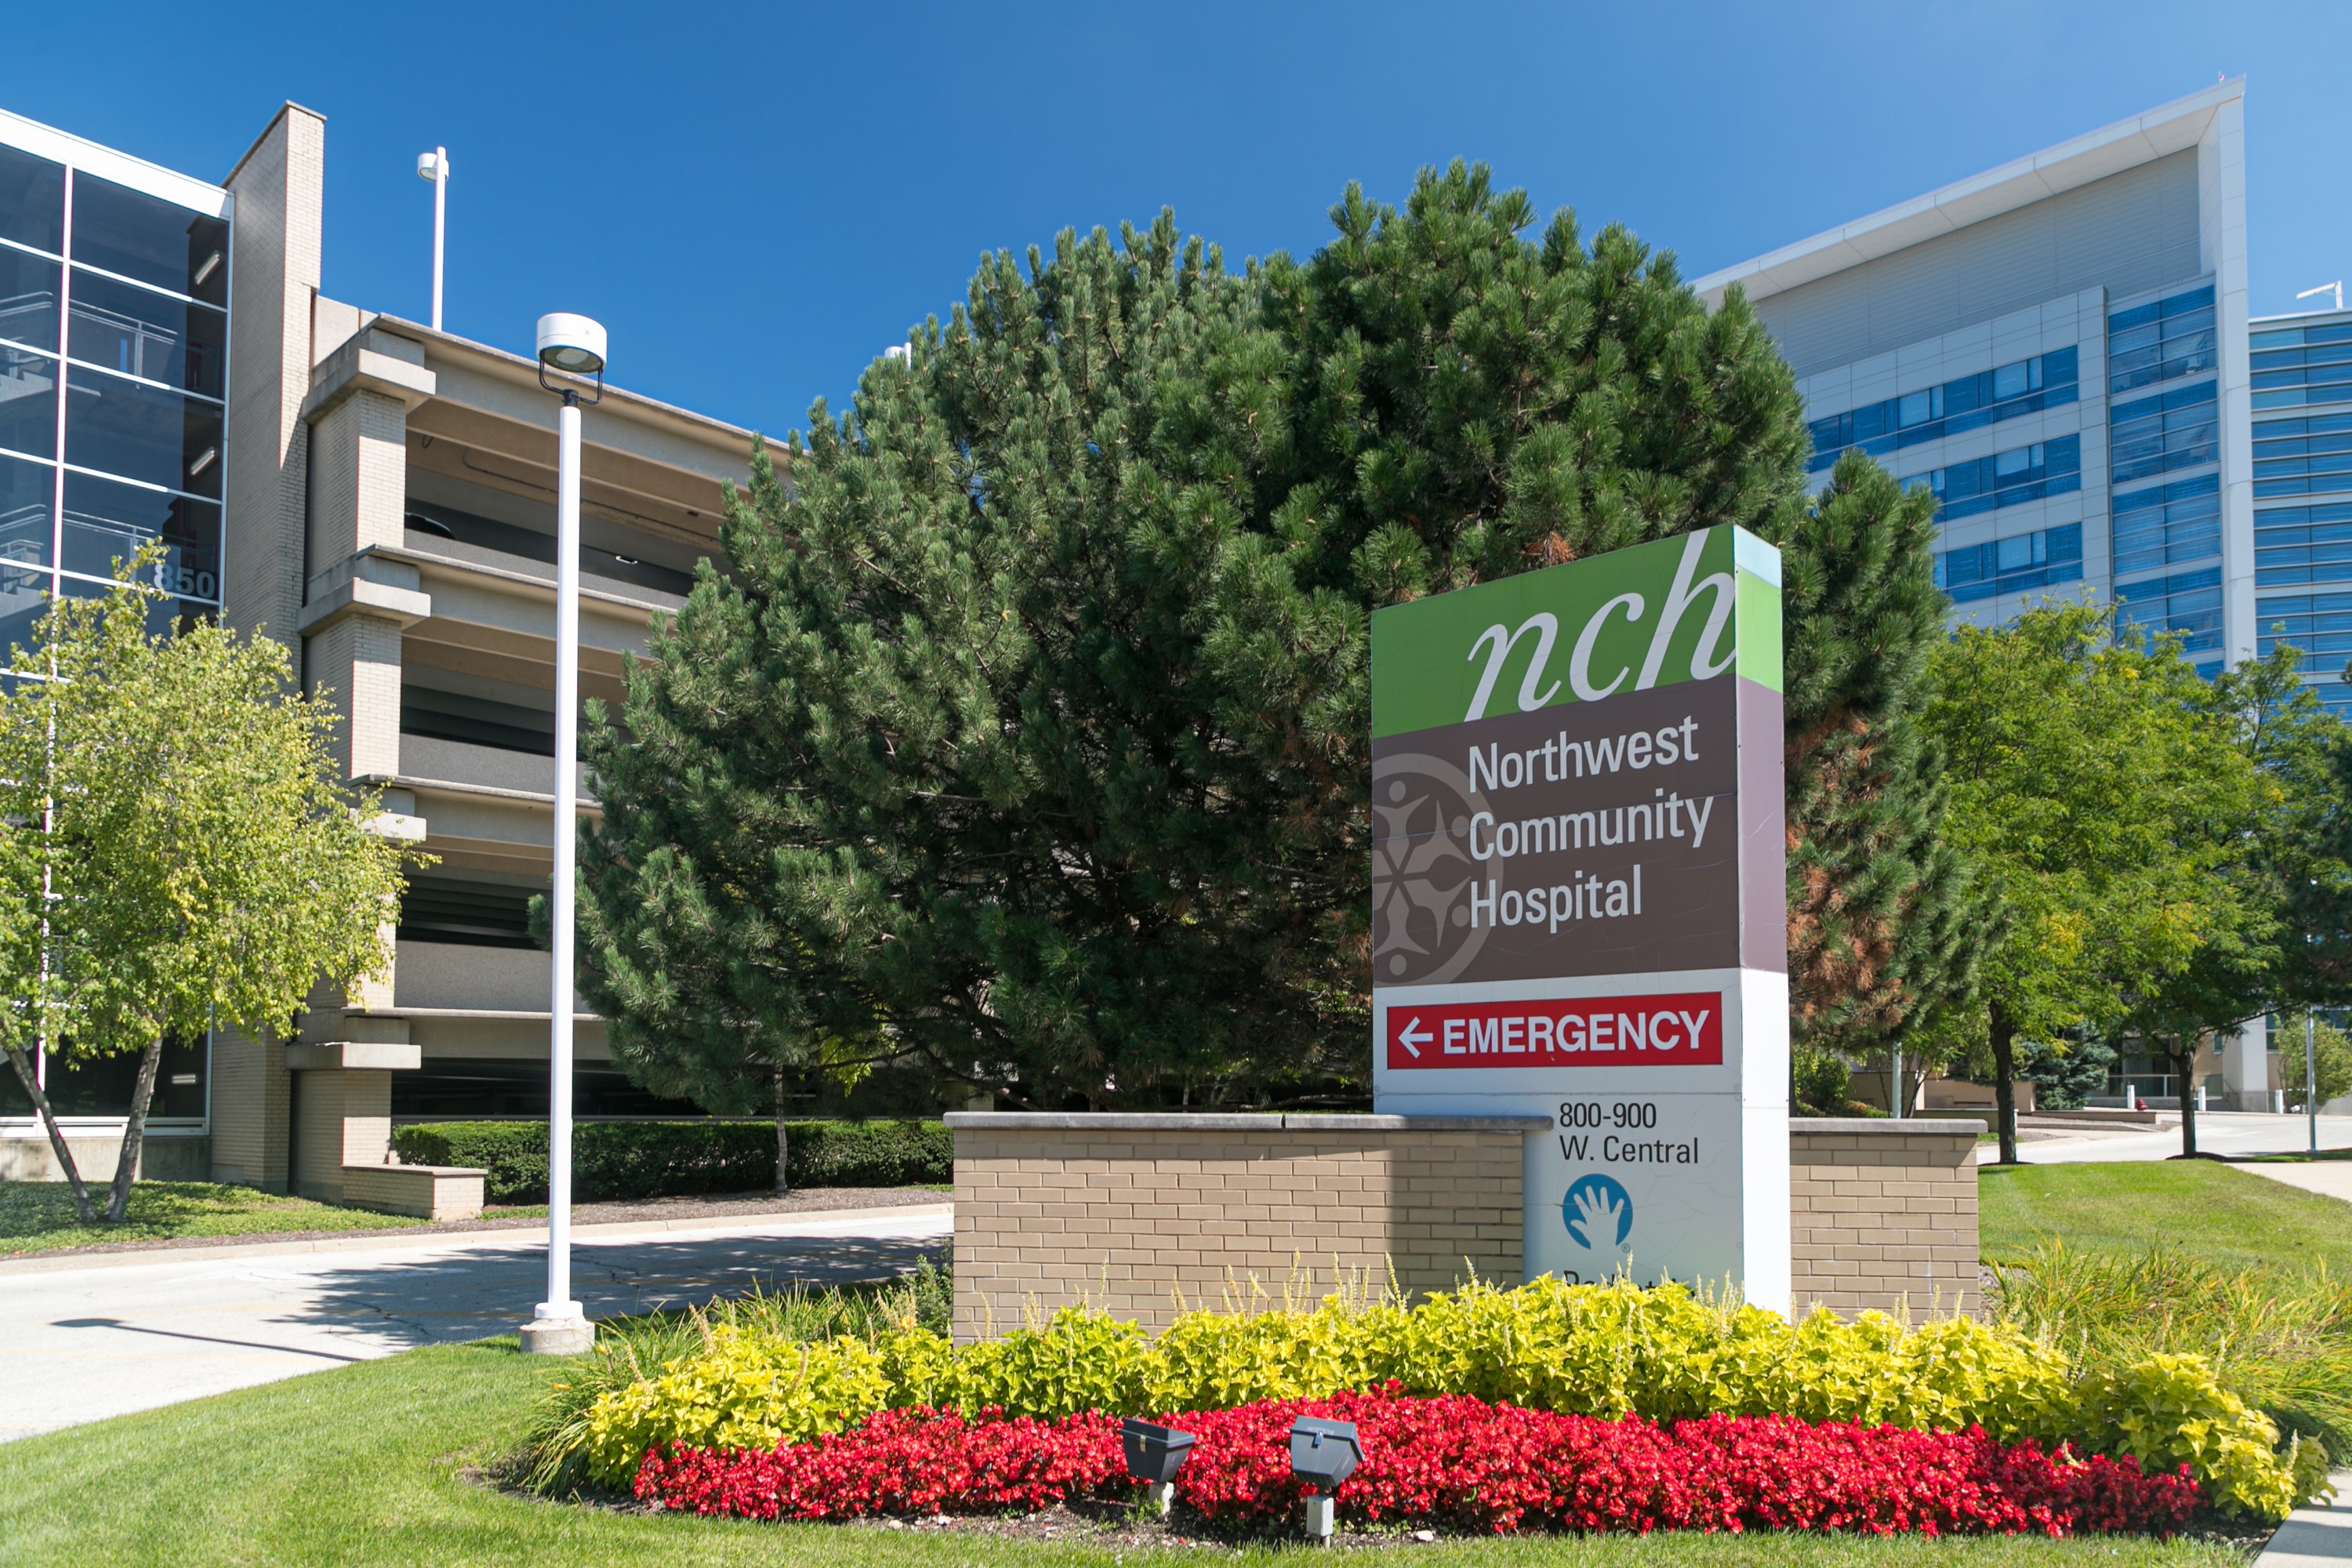 Nch Hospital And Emergency Department Northwest Community Healthcare